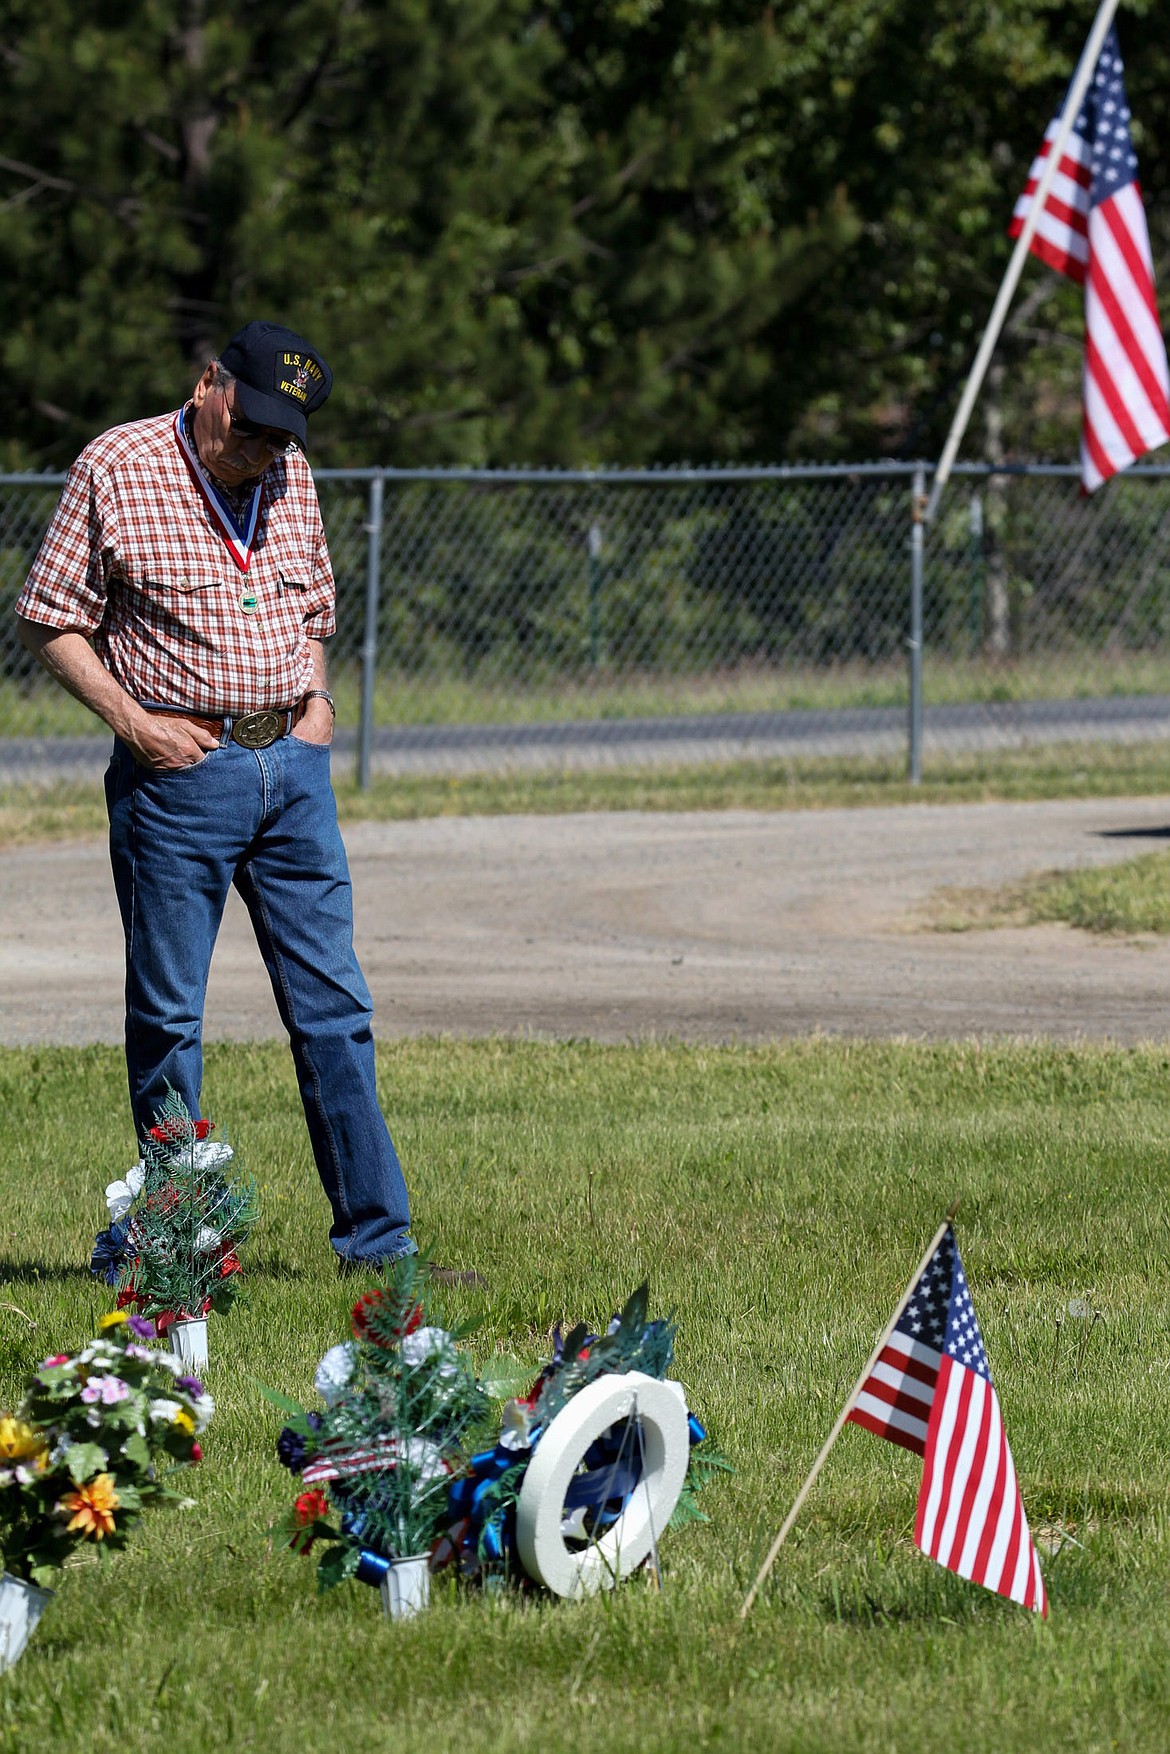 U.S. Navy veteran Bill Silva of Libby visits graves before a Memorial Day ceremony at Libby Cemetery Monday, May 29, 2017. (John Blodgett/The Western News)